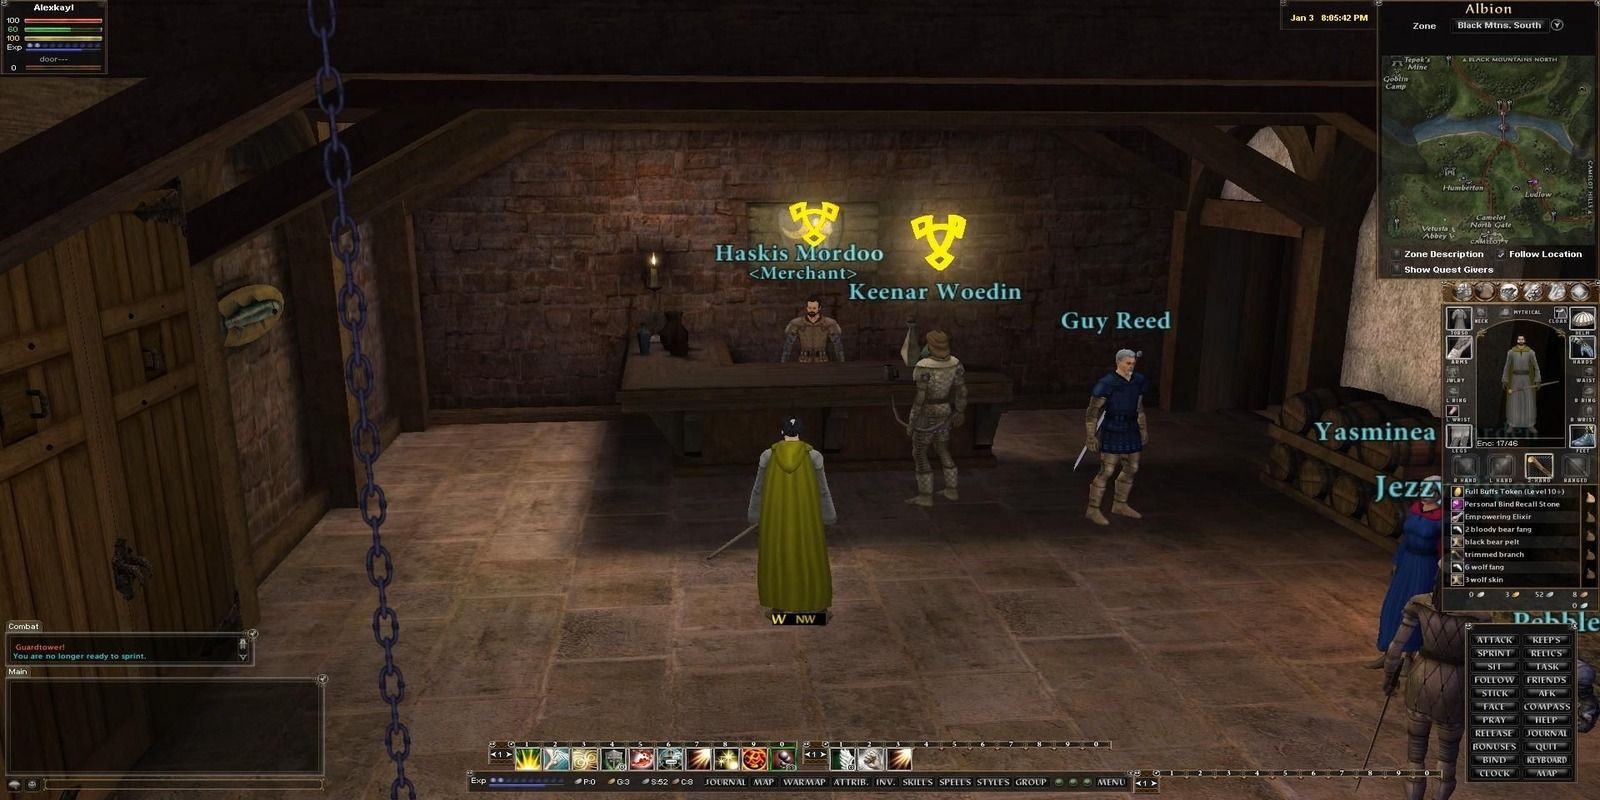 The player interacting with other NPCs on a table.